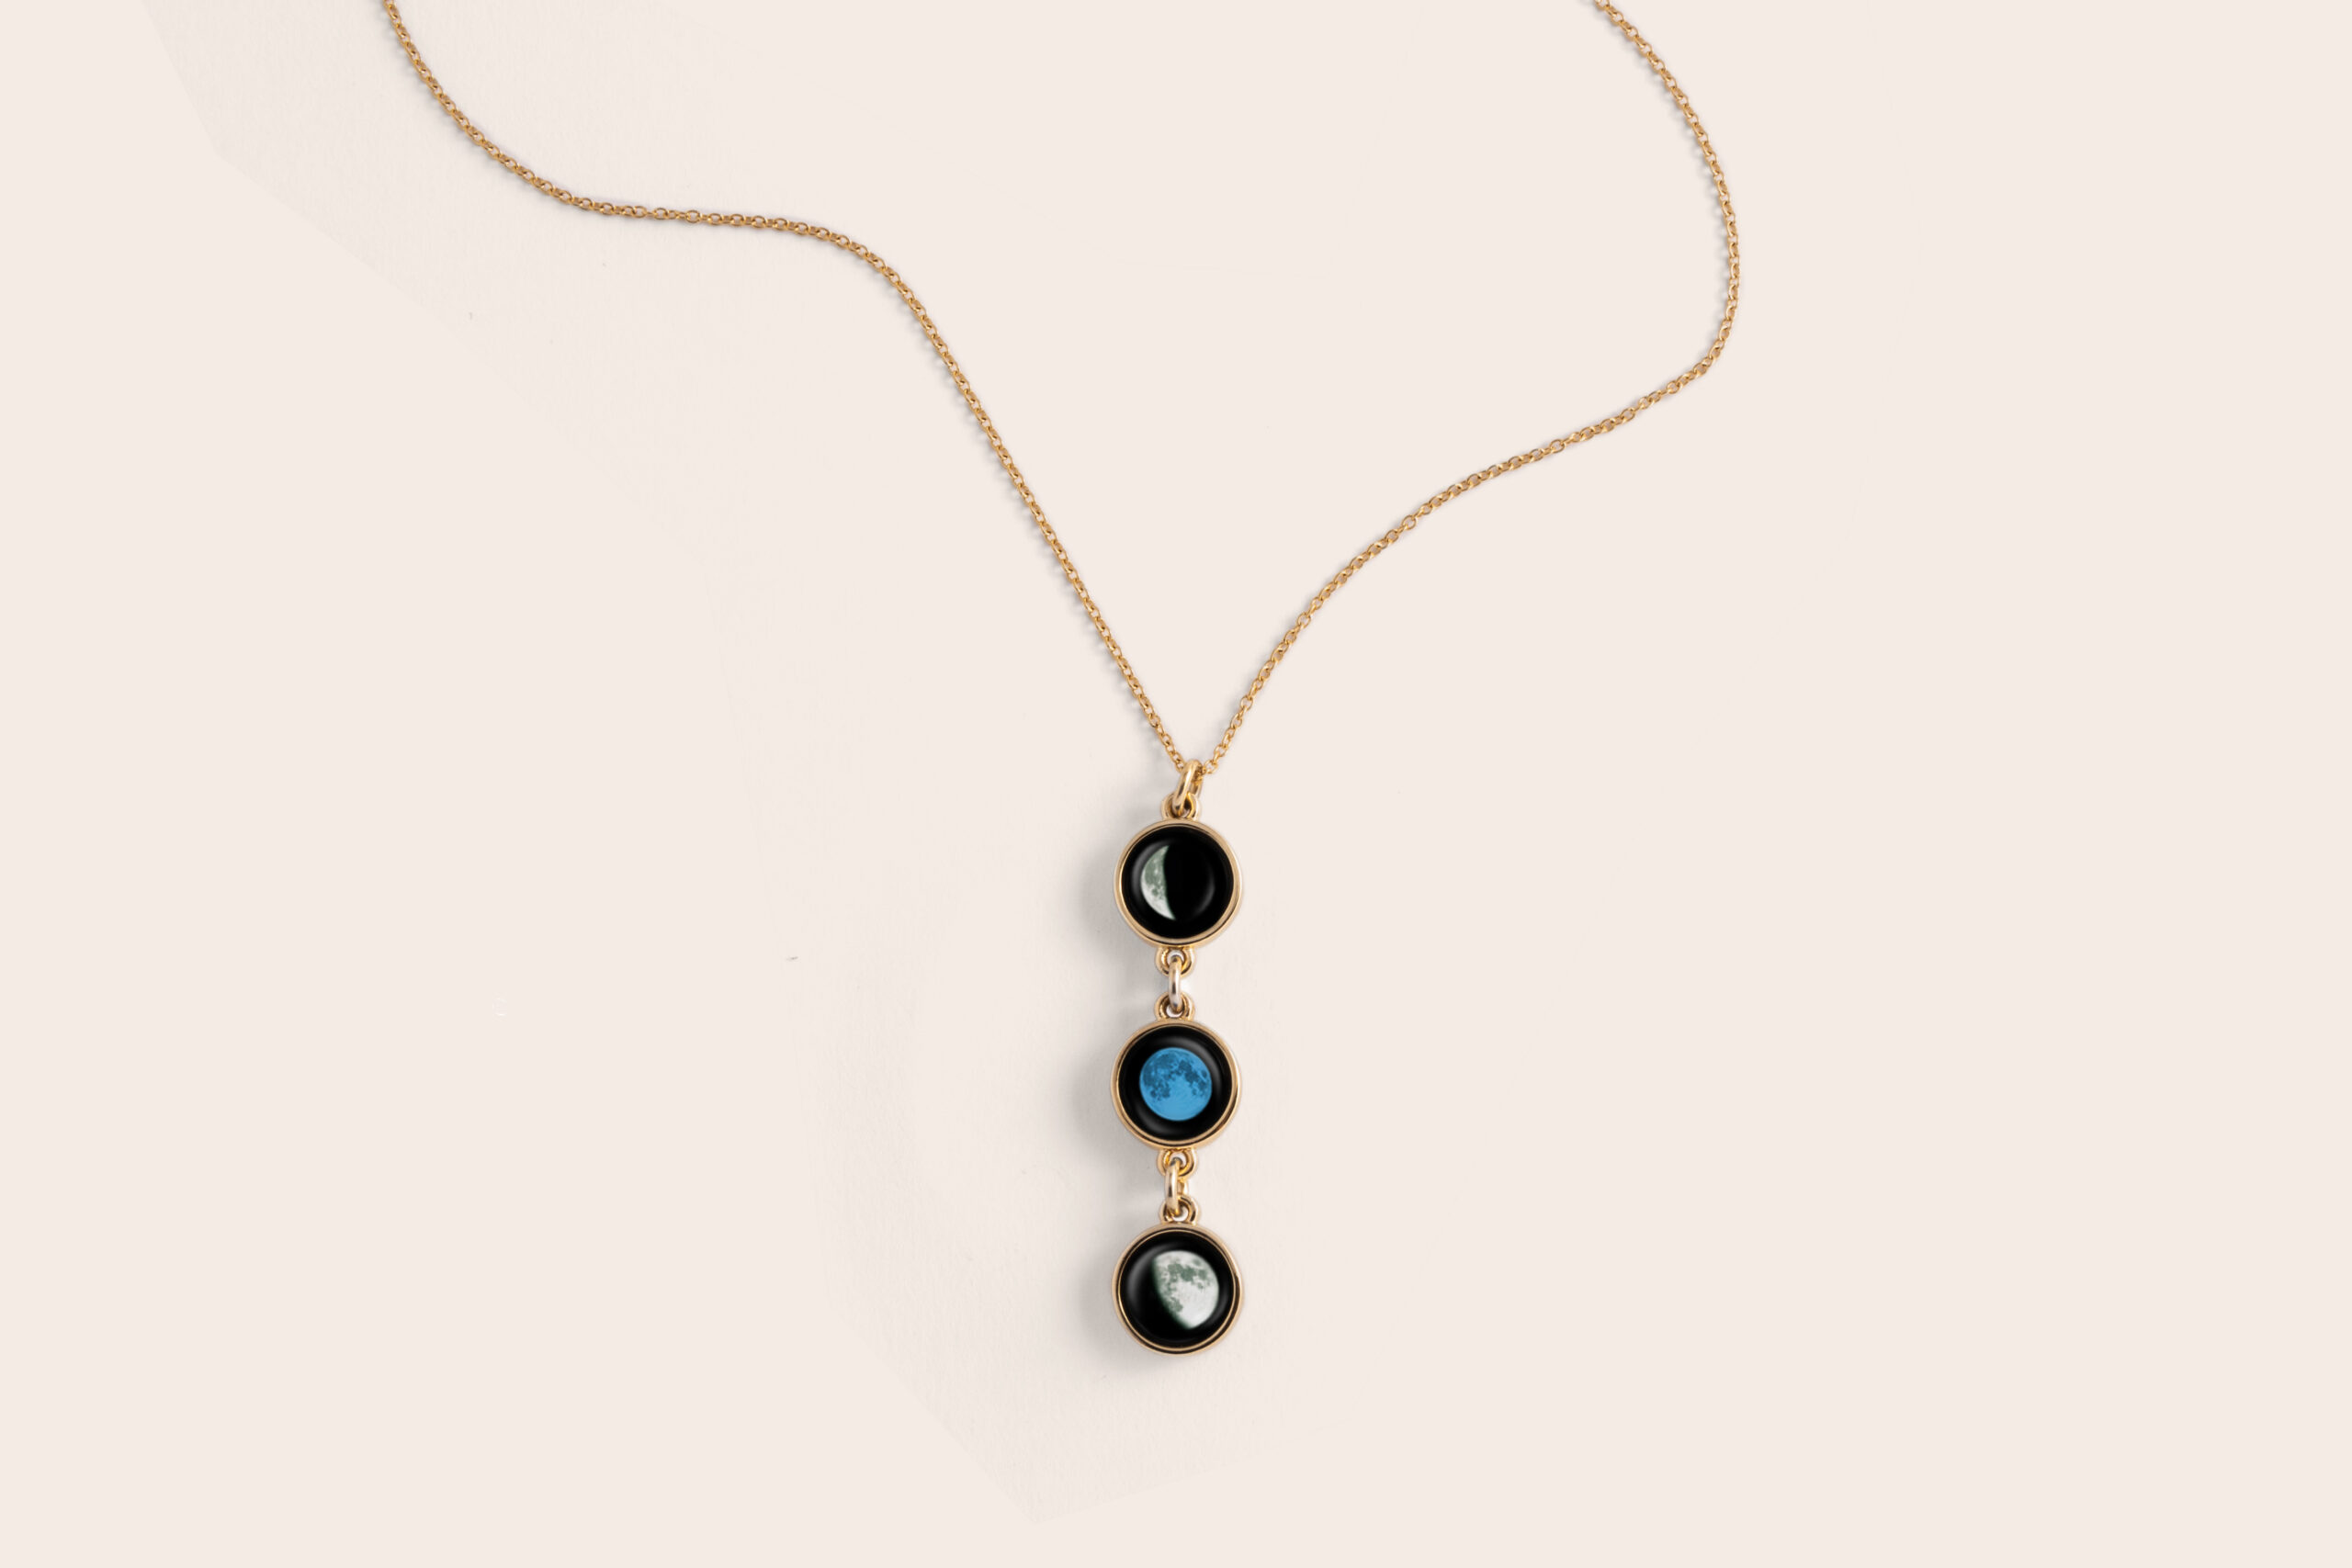 Moonglow necklace for Mother's Day